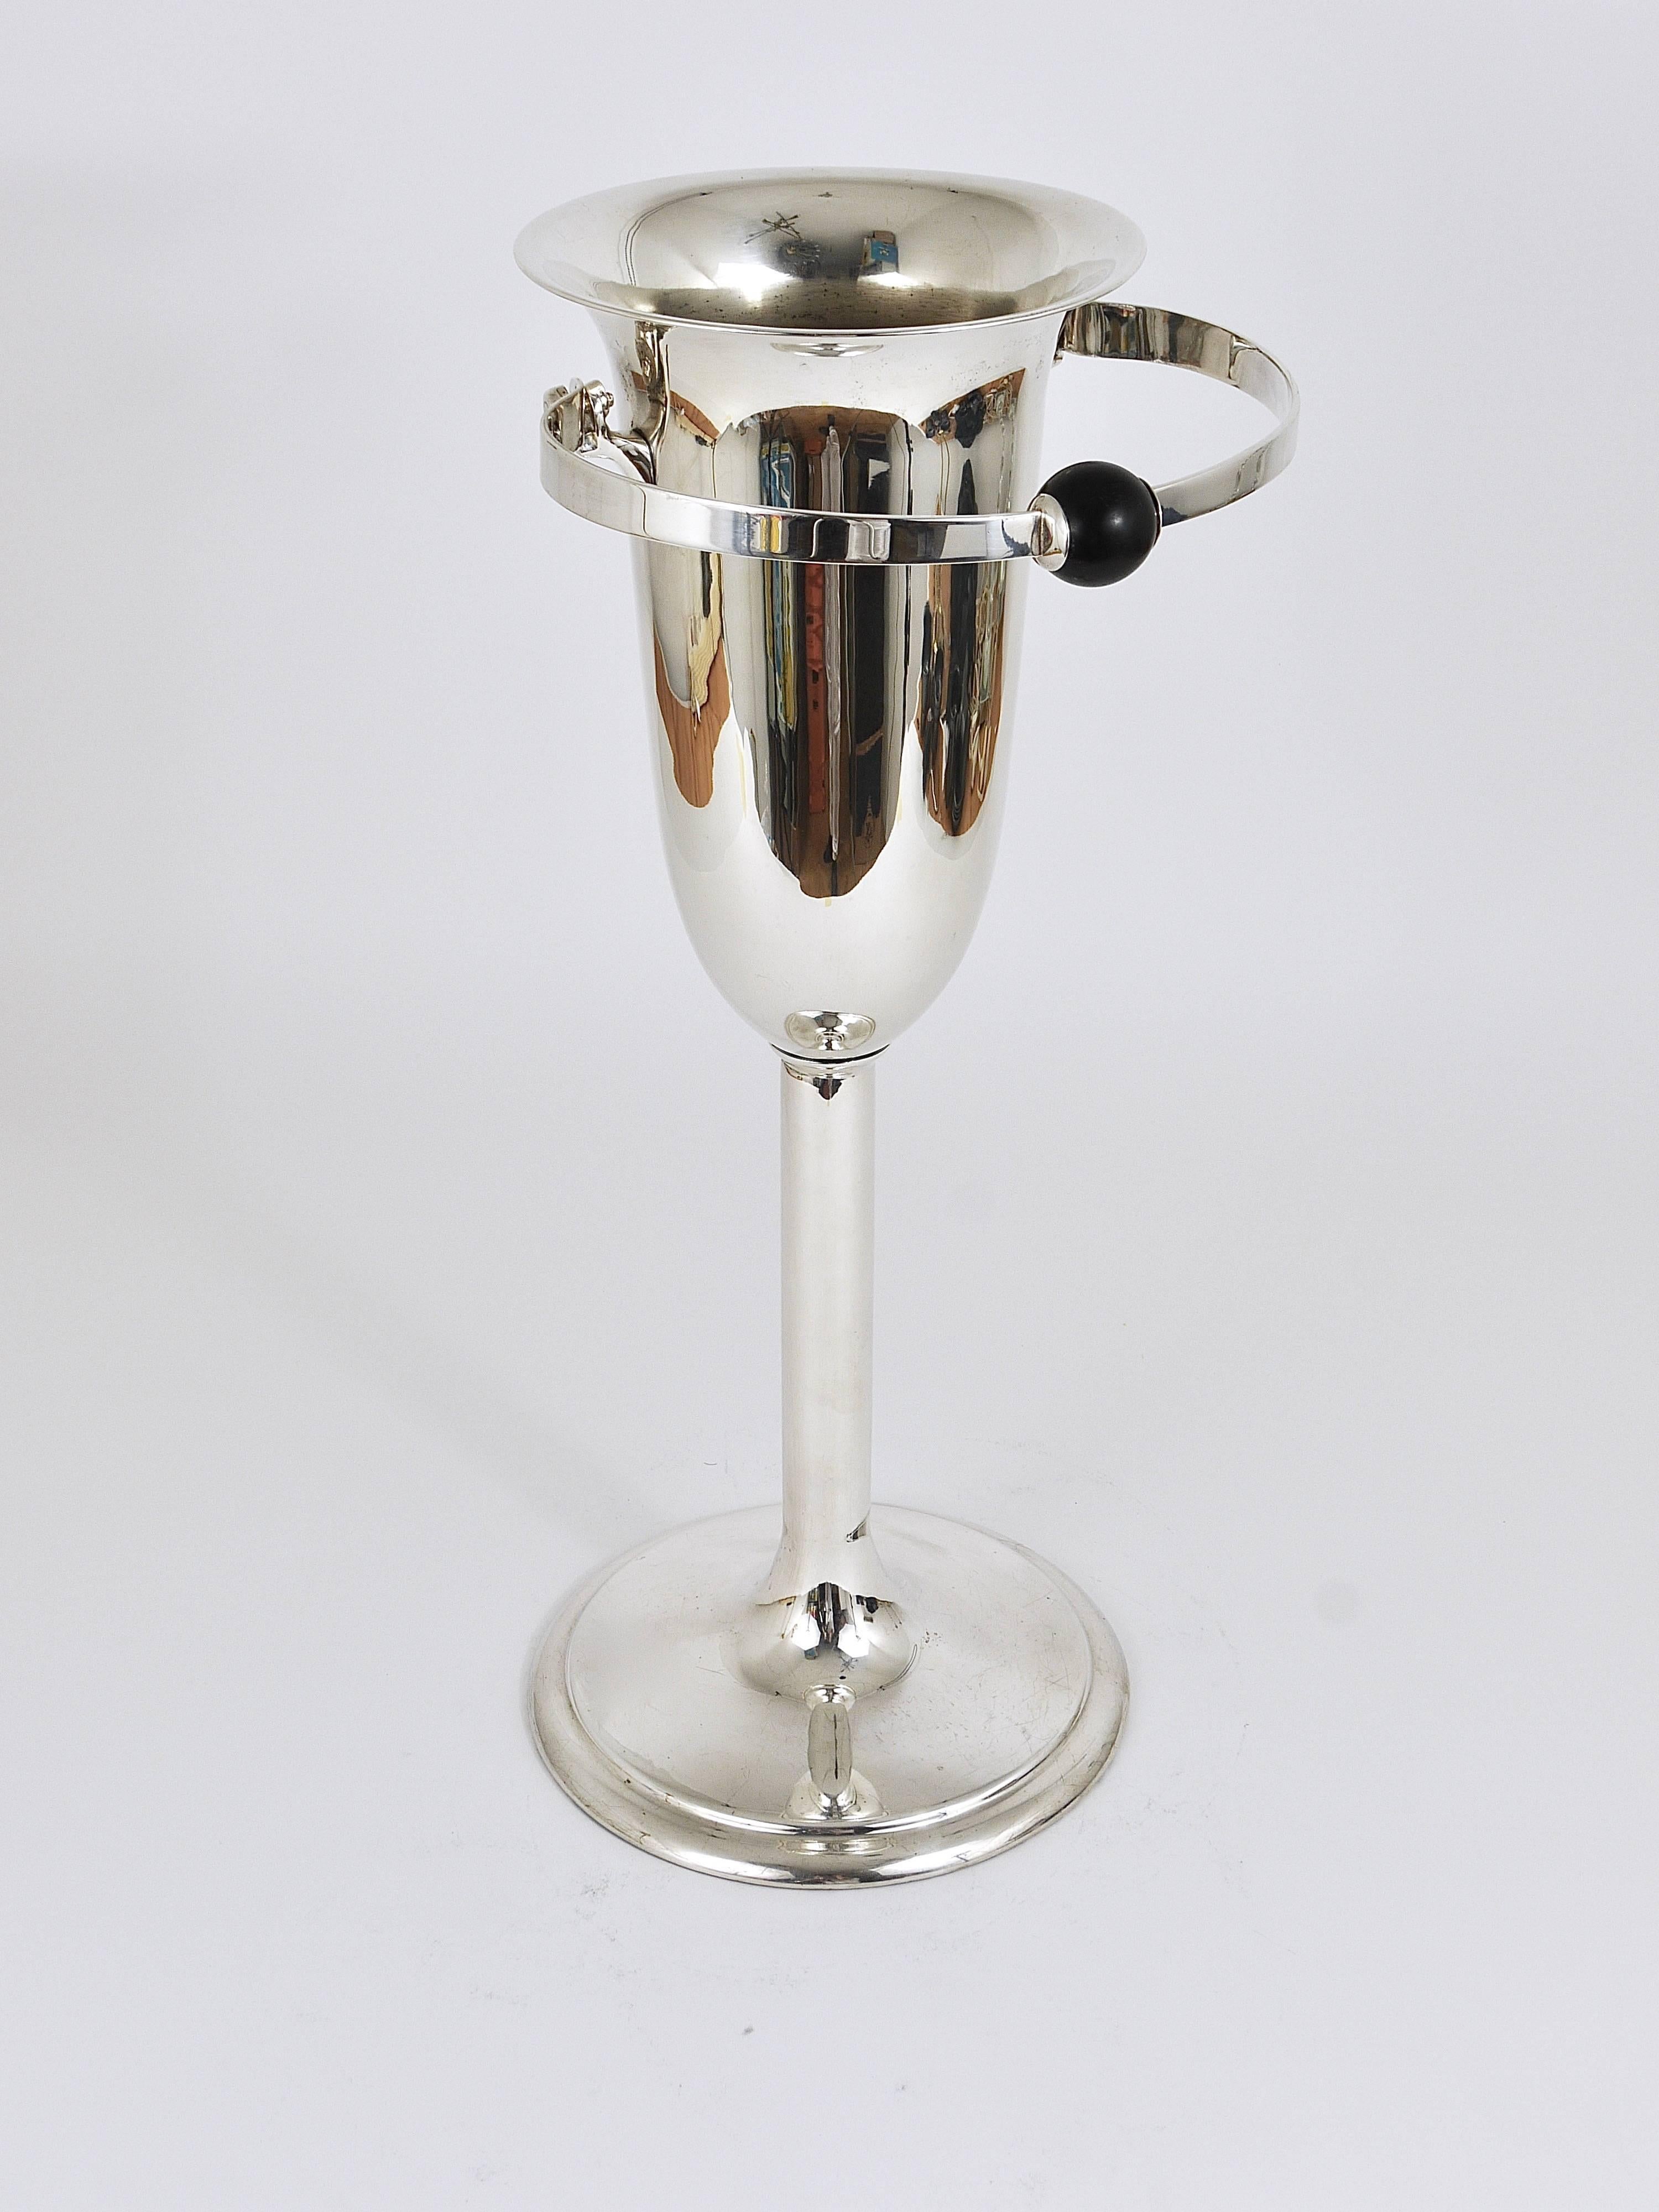 Mid-20th Century French Art Deco Floor Standing Wine orChampagne Cooler Ice Bucket, Silver, 1930s